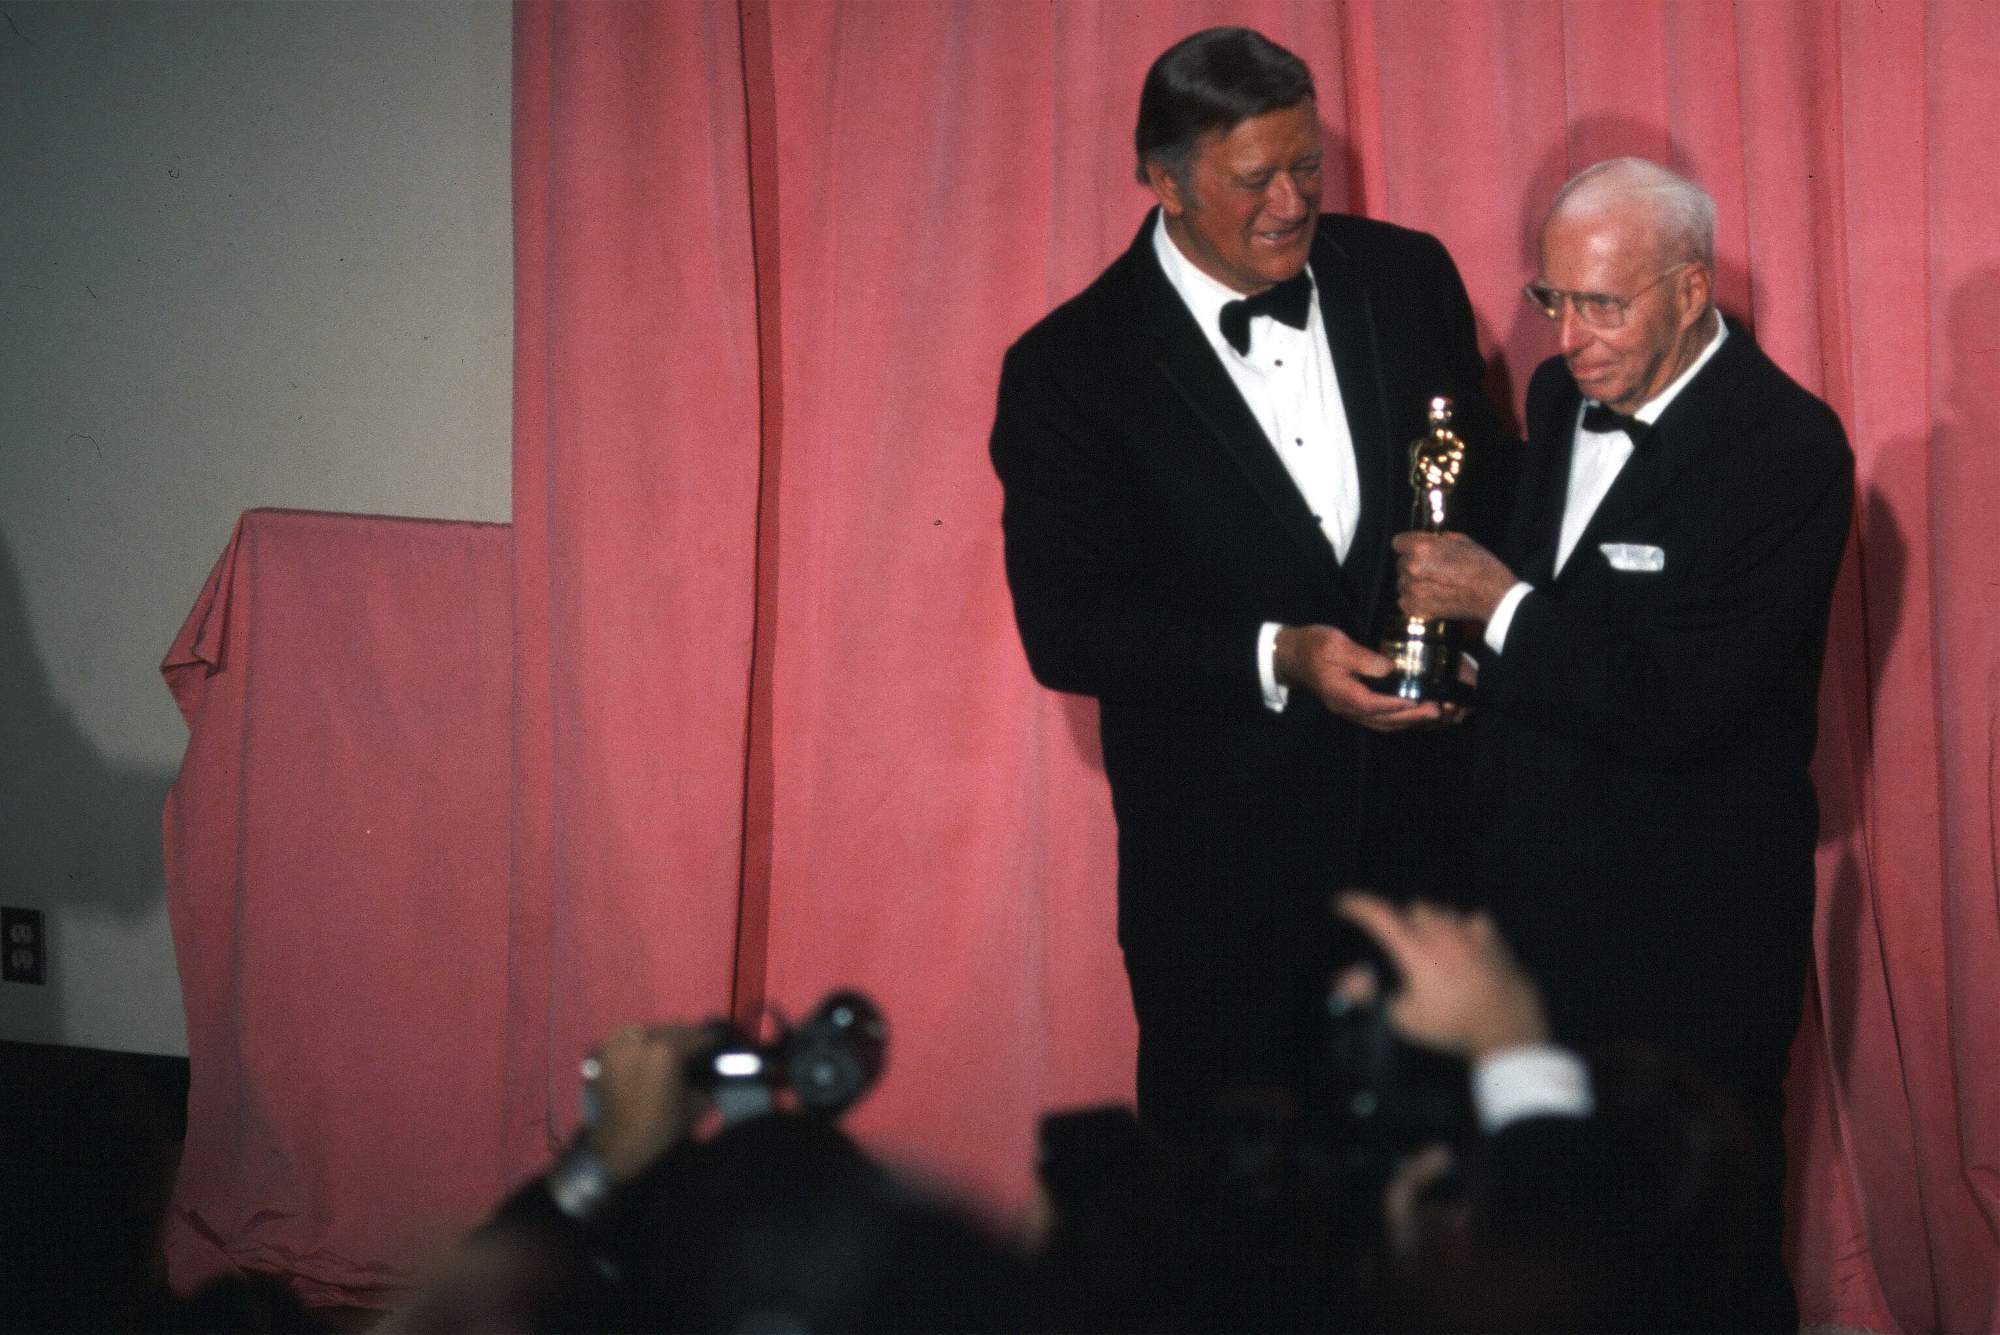 John Wayne and Howard Hawks holding an Oscar together while wearing tuxes